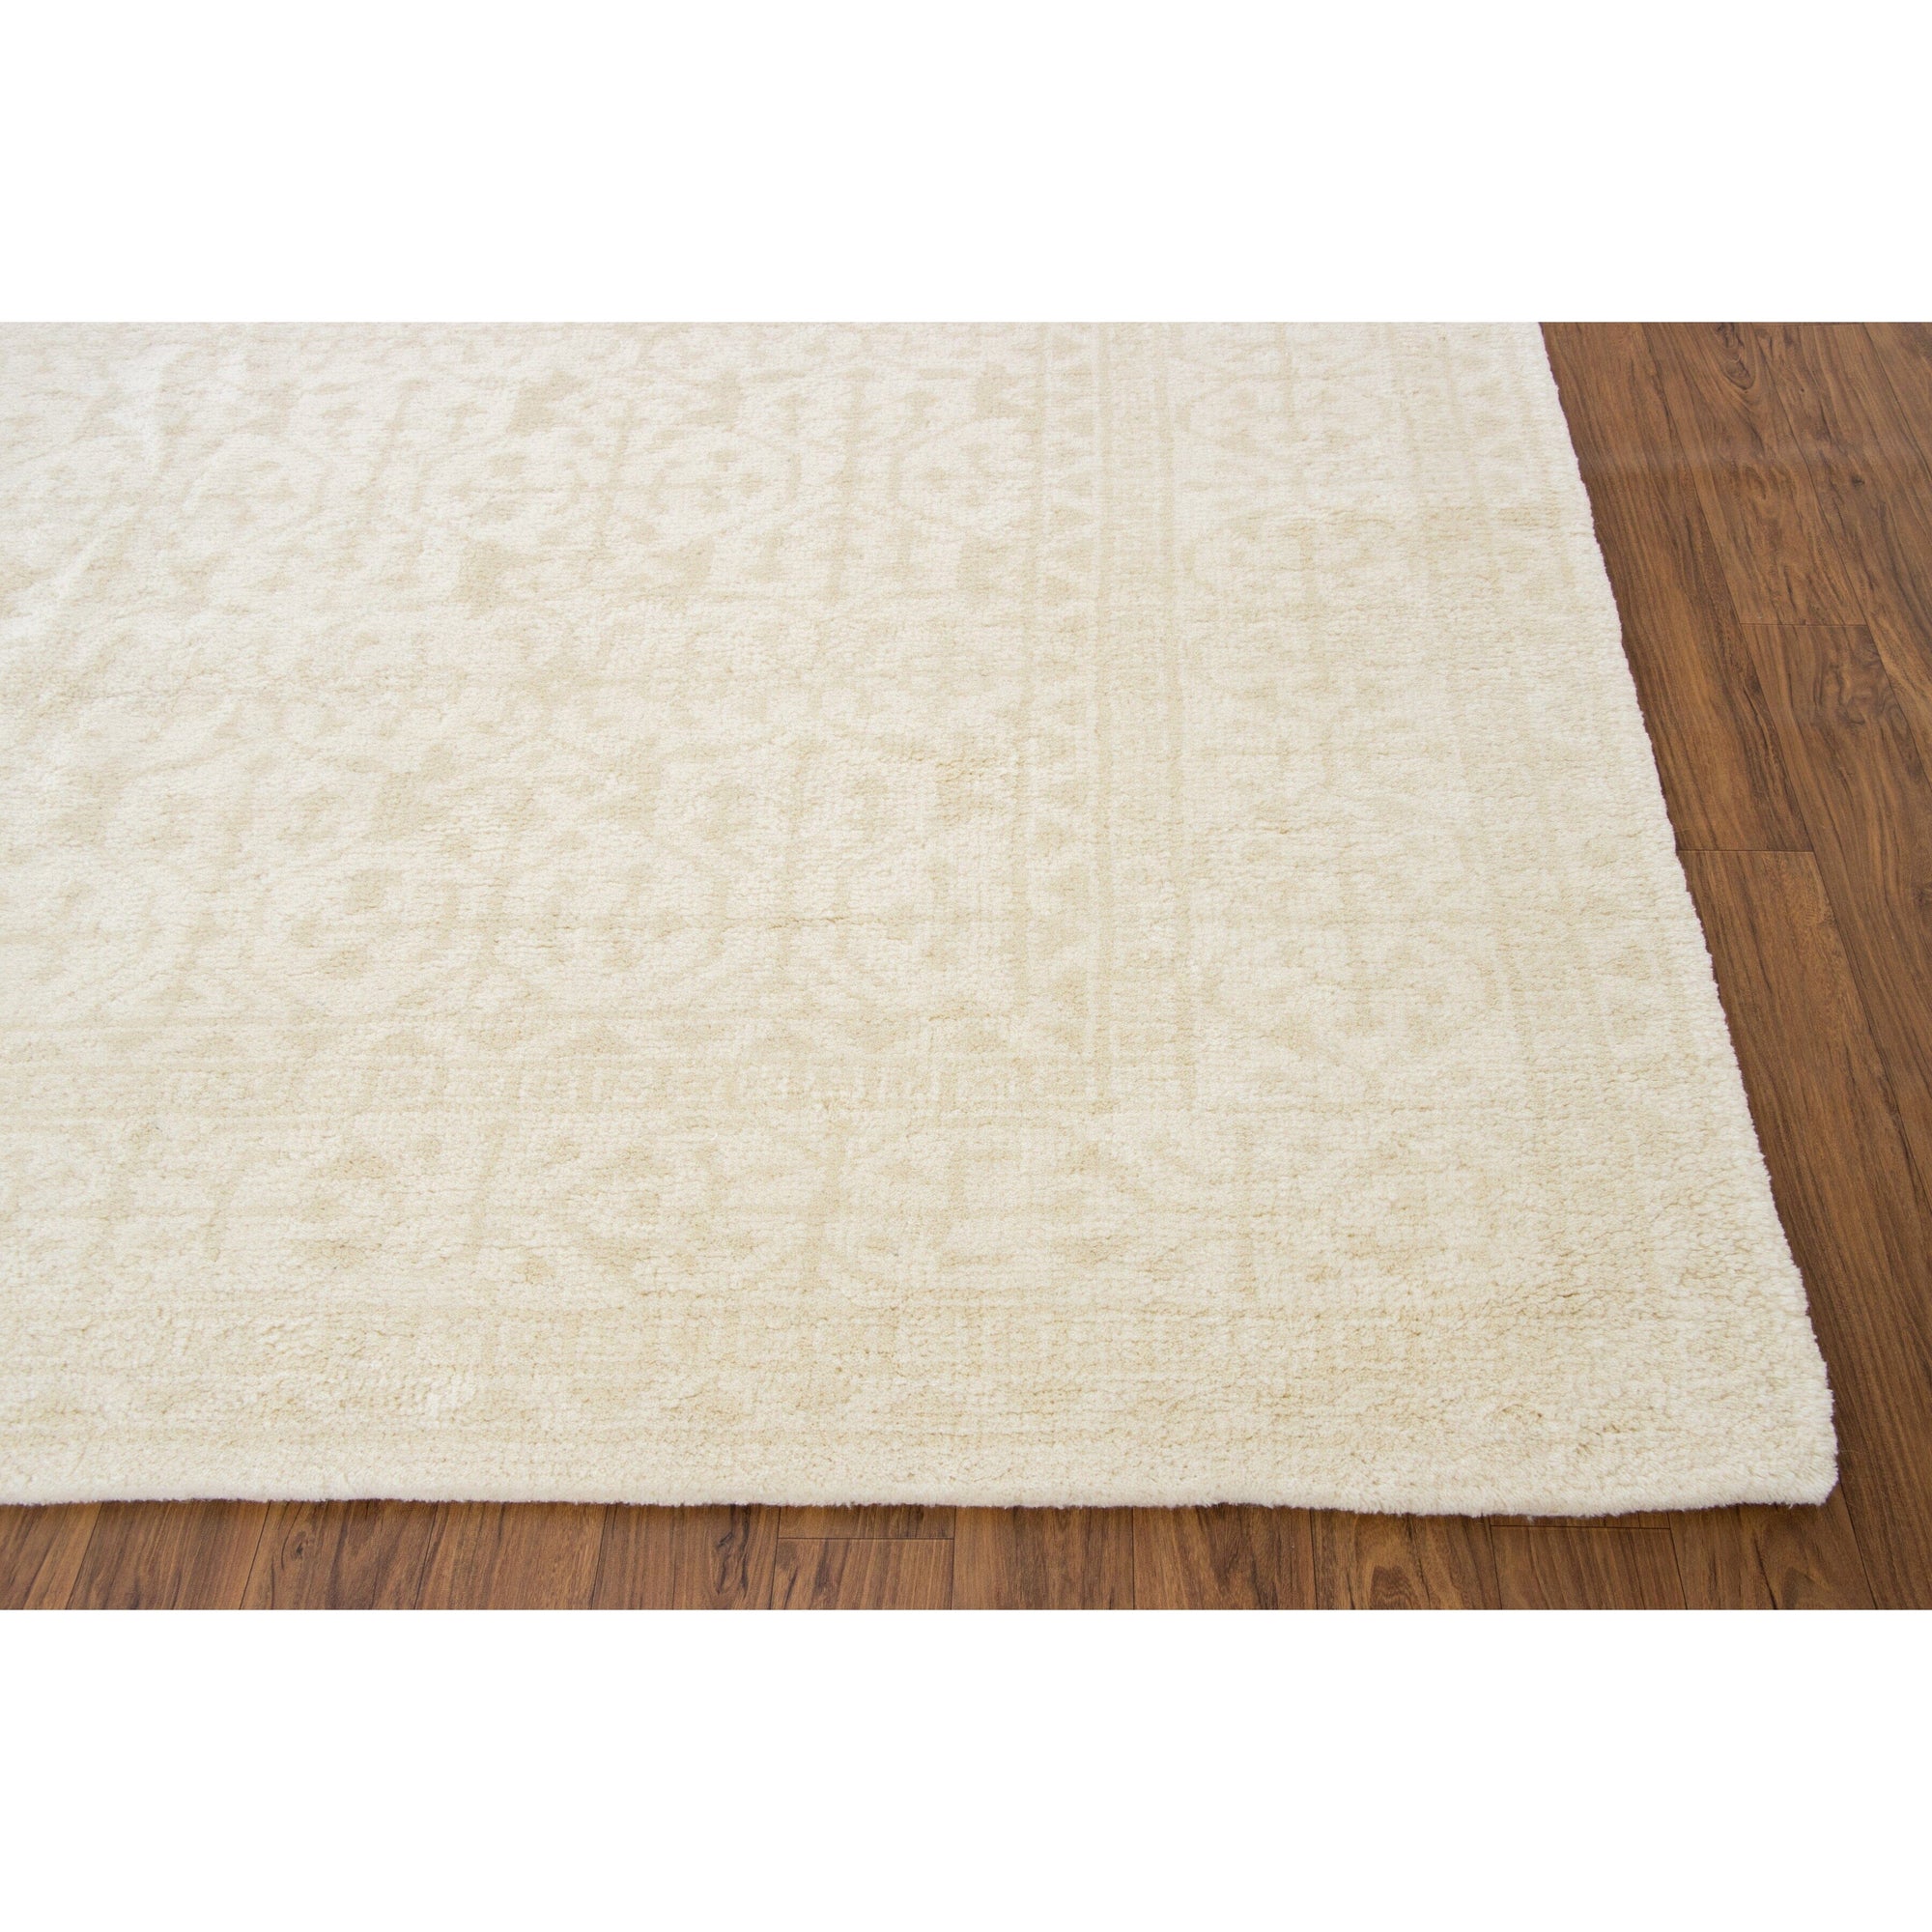 Middleton Sand Handknotted Wool SAMPLE handknotted tibetan 60 knot Organic Weave Shop 